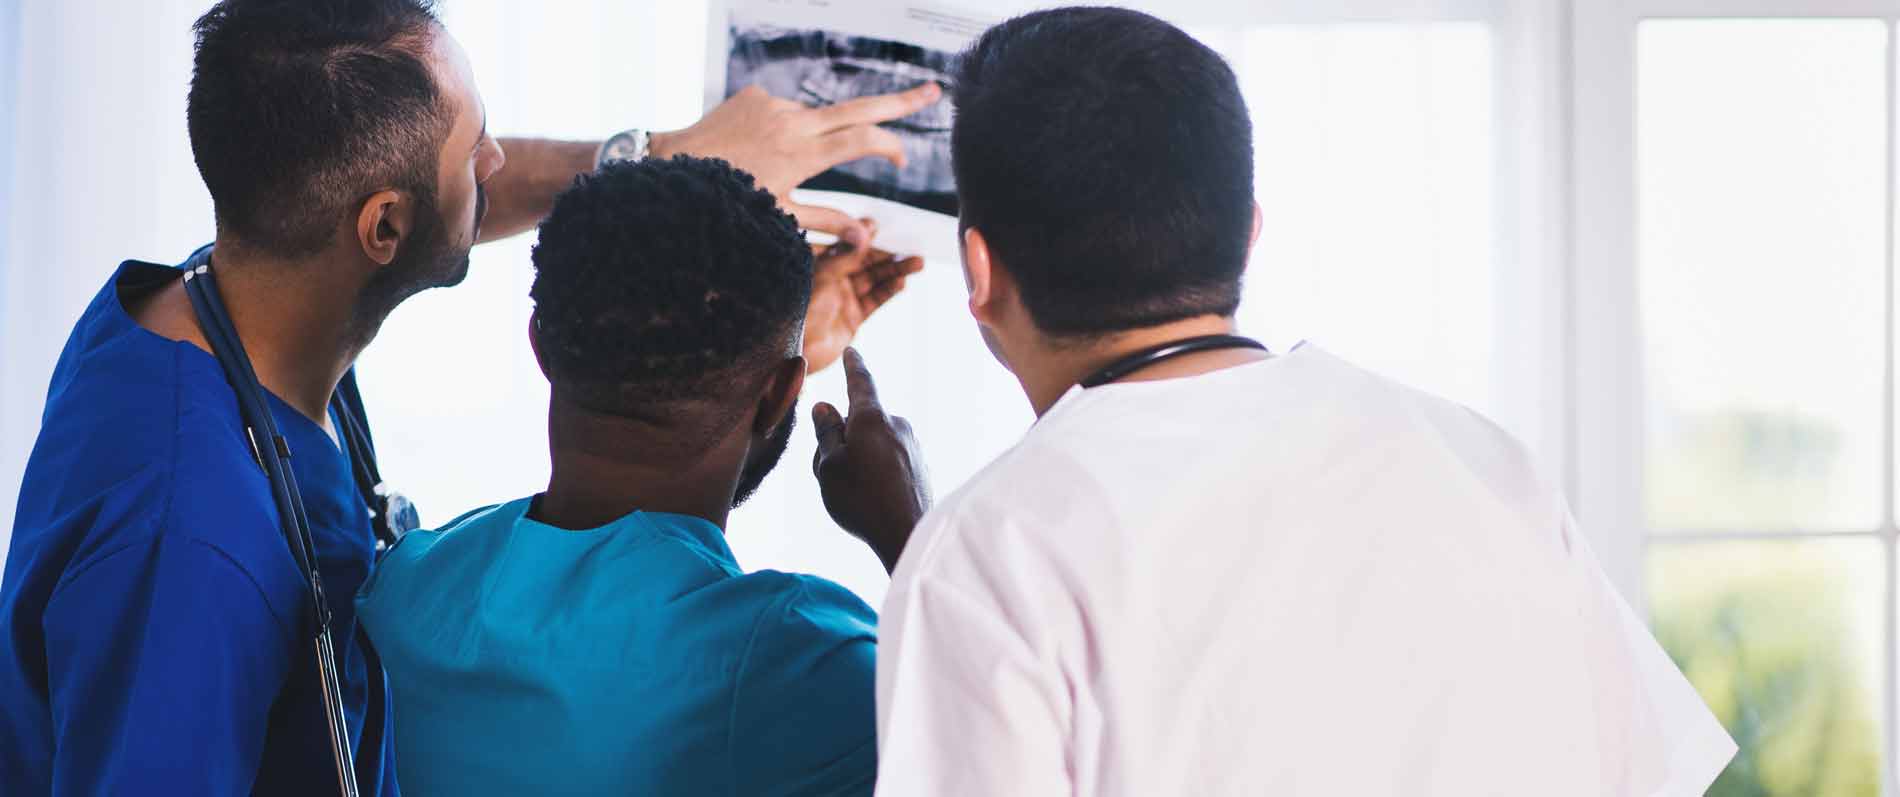 Radiology professionals reviewing scan